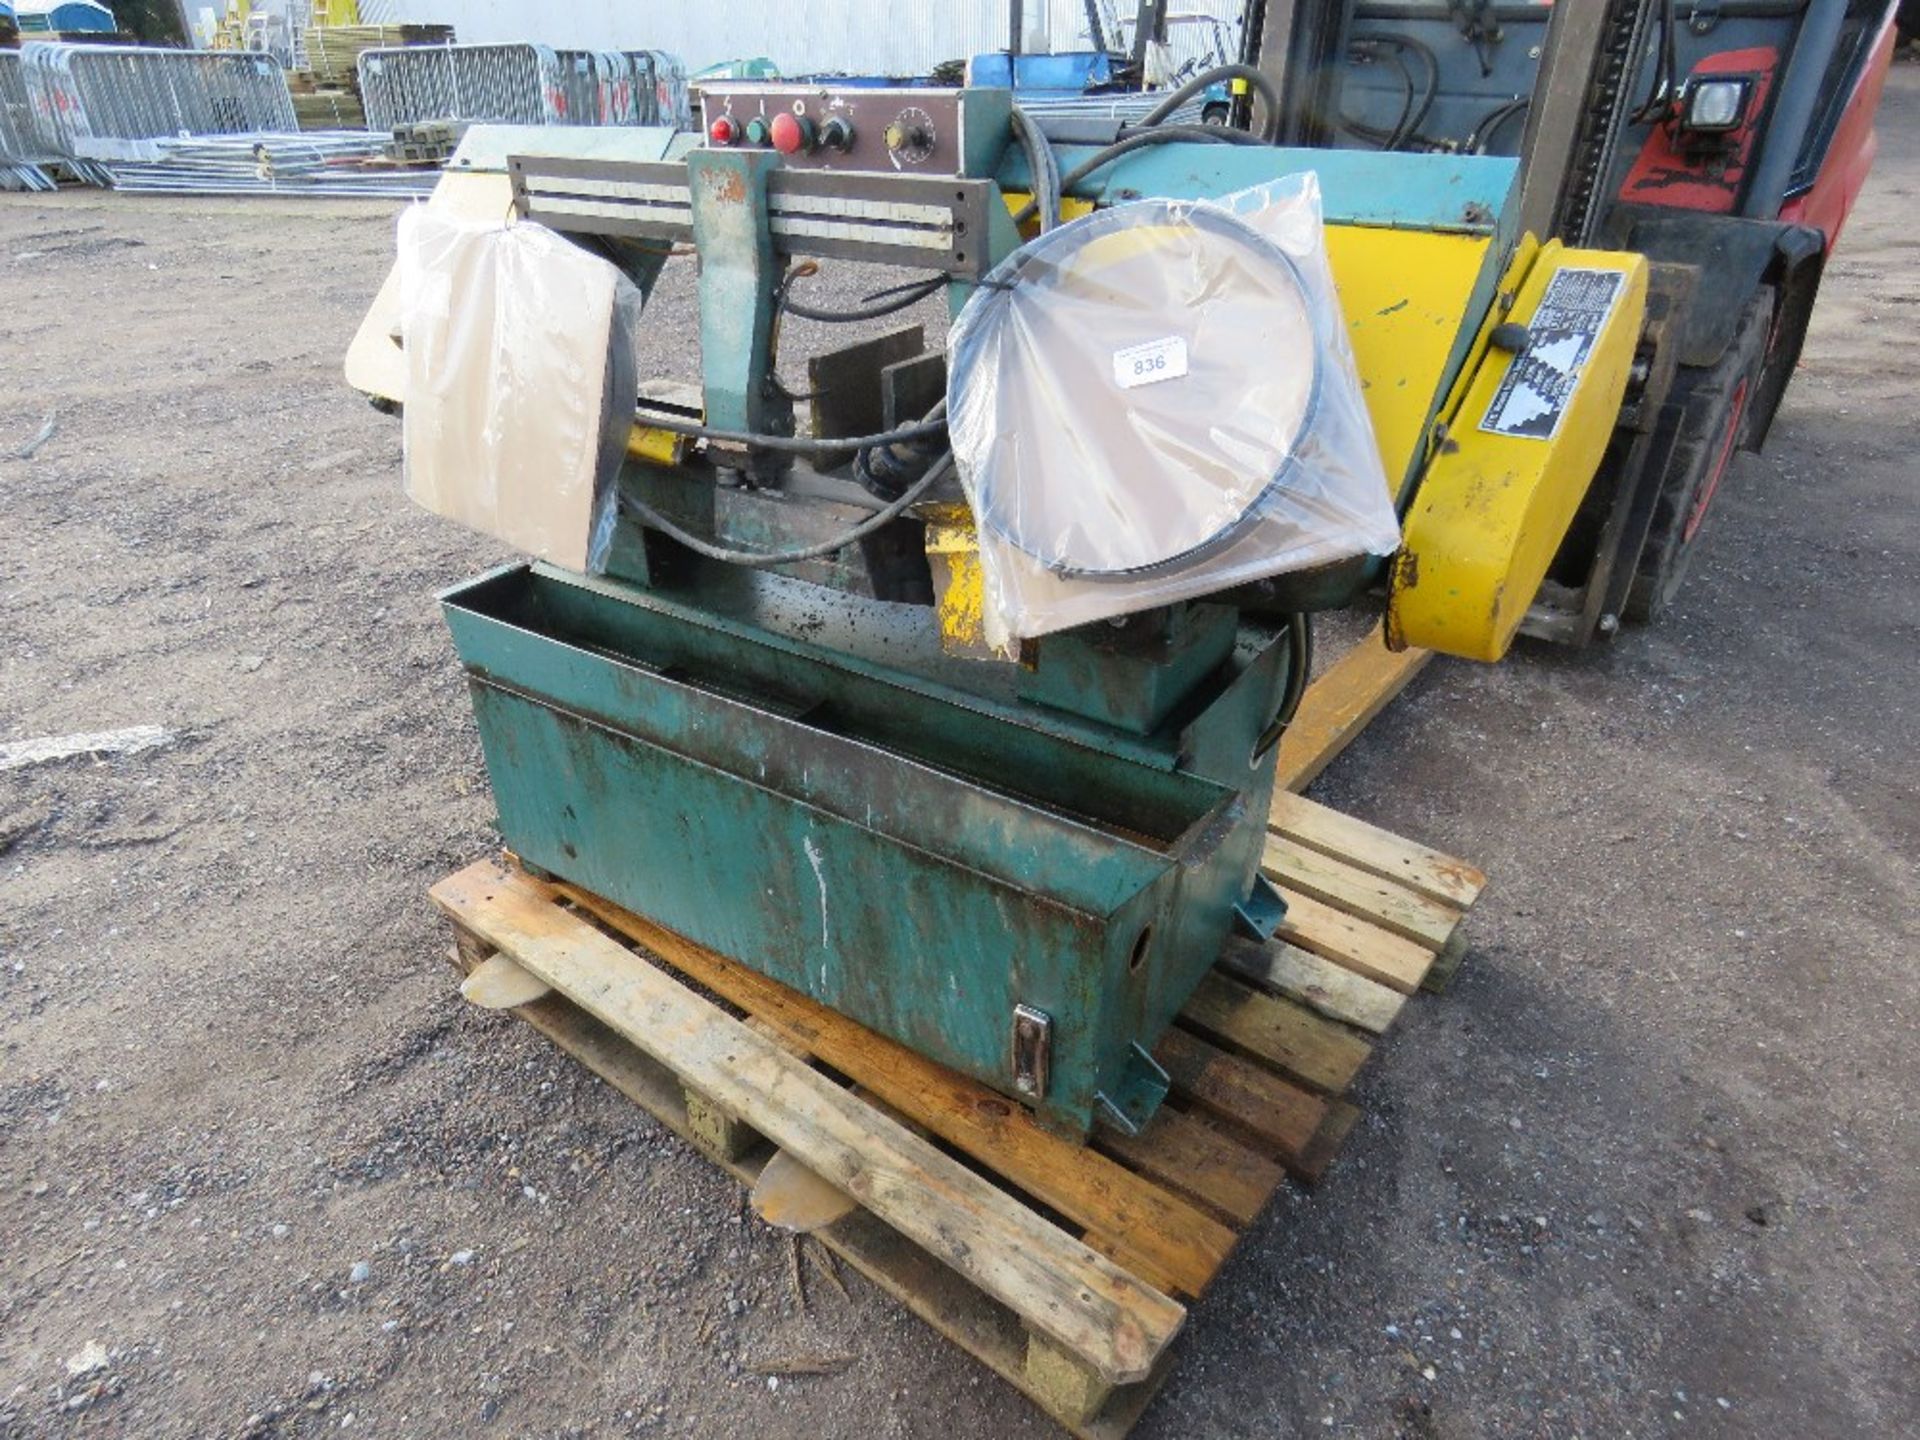 3 PHASE POWERED METAL CUTTING BANDSAW C/W SPARE BLADES. DIRECT EX LOCAL FARM...WORKING WHEN RECENTLY - Image 2 of 7